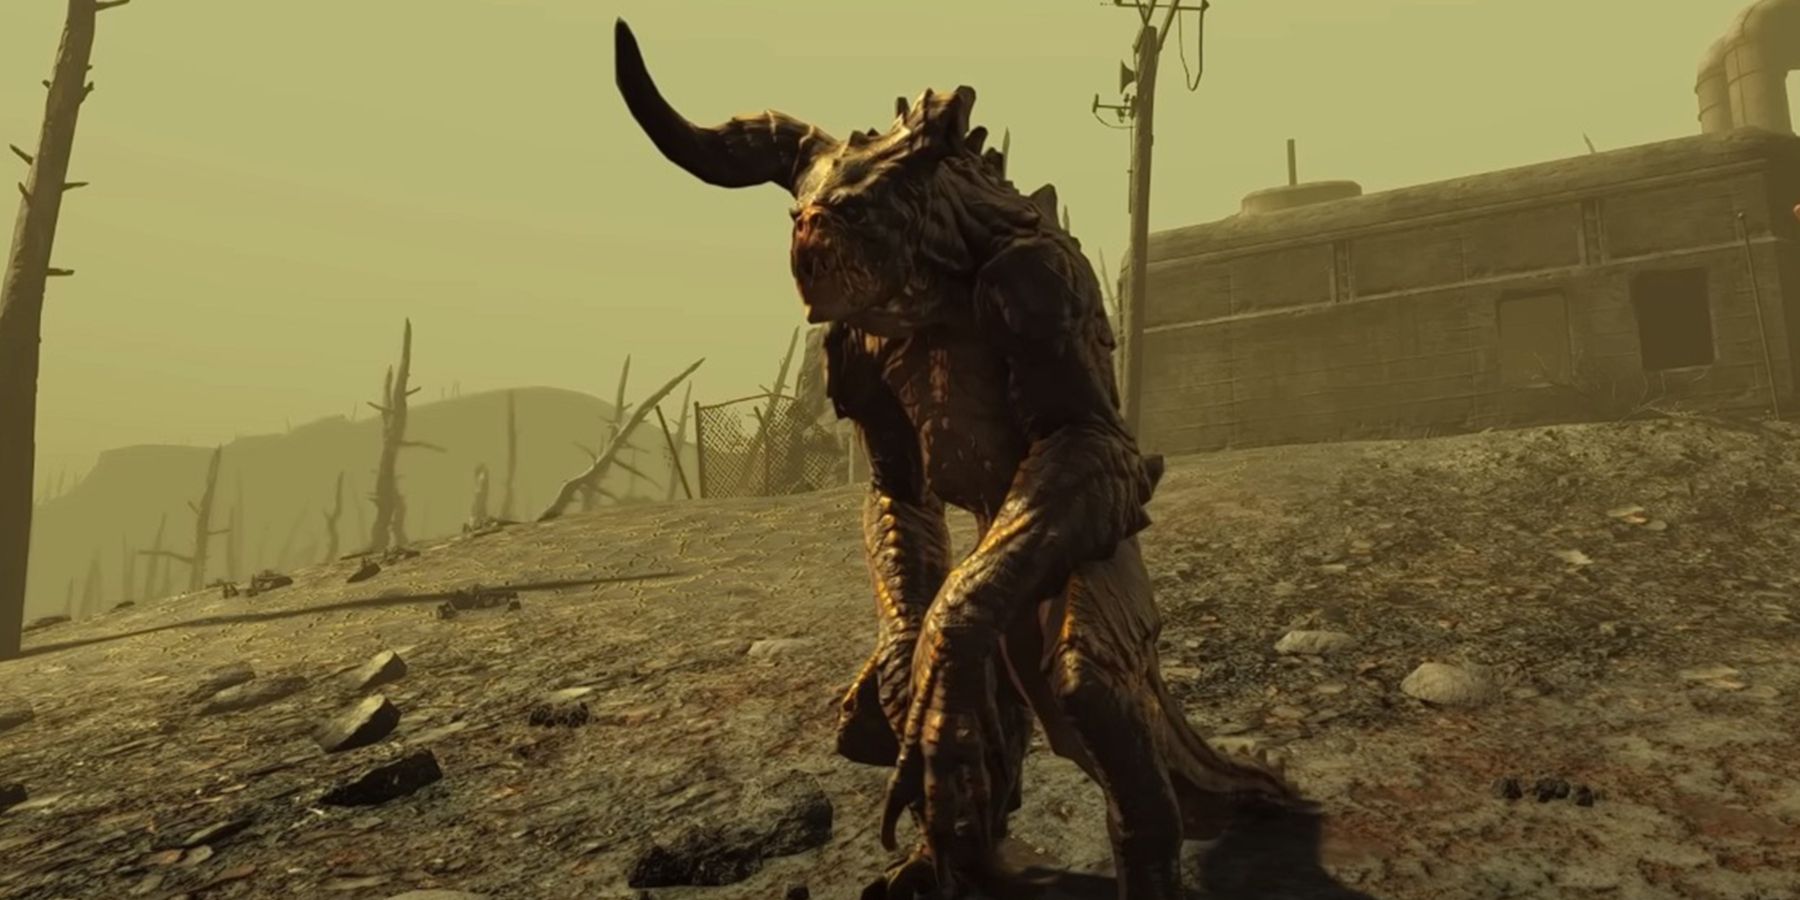 A Savage Deathclaw Mutant in Fallout 4